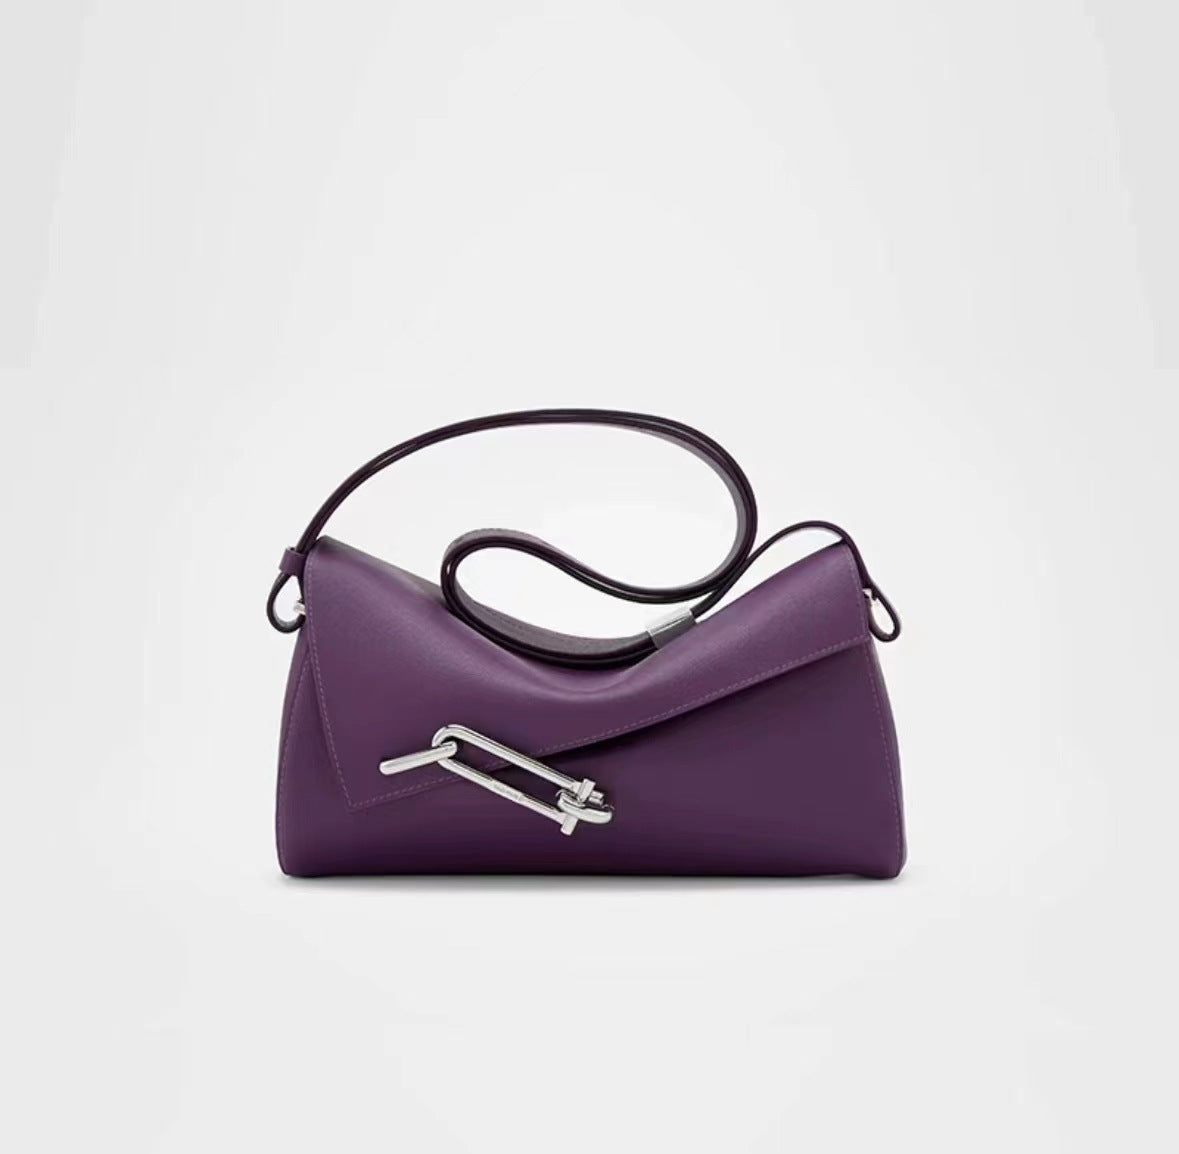 Small square bag with padlock for women